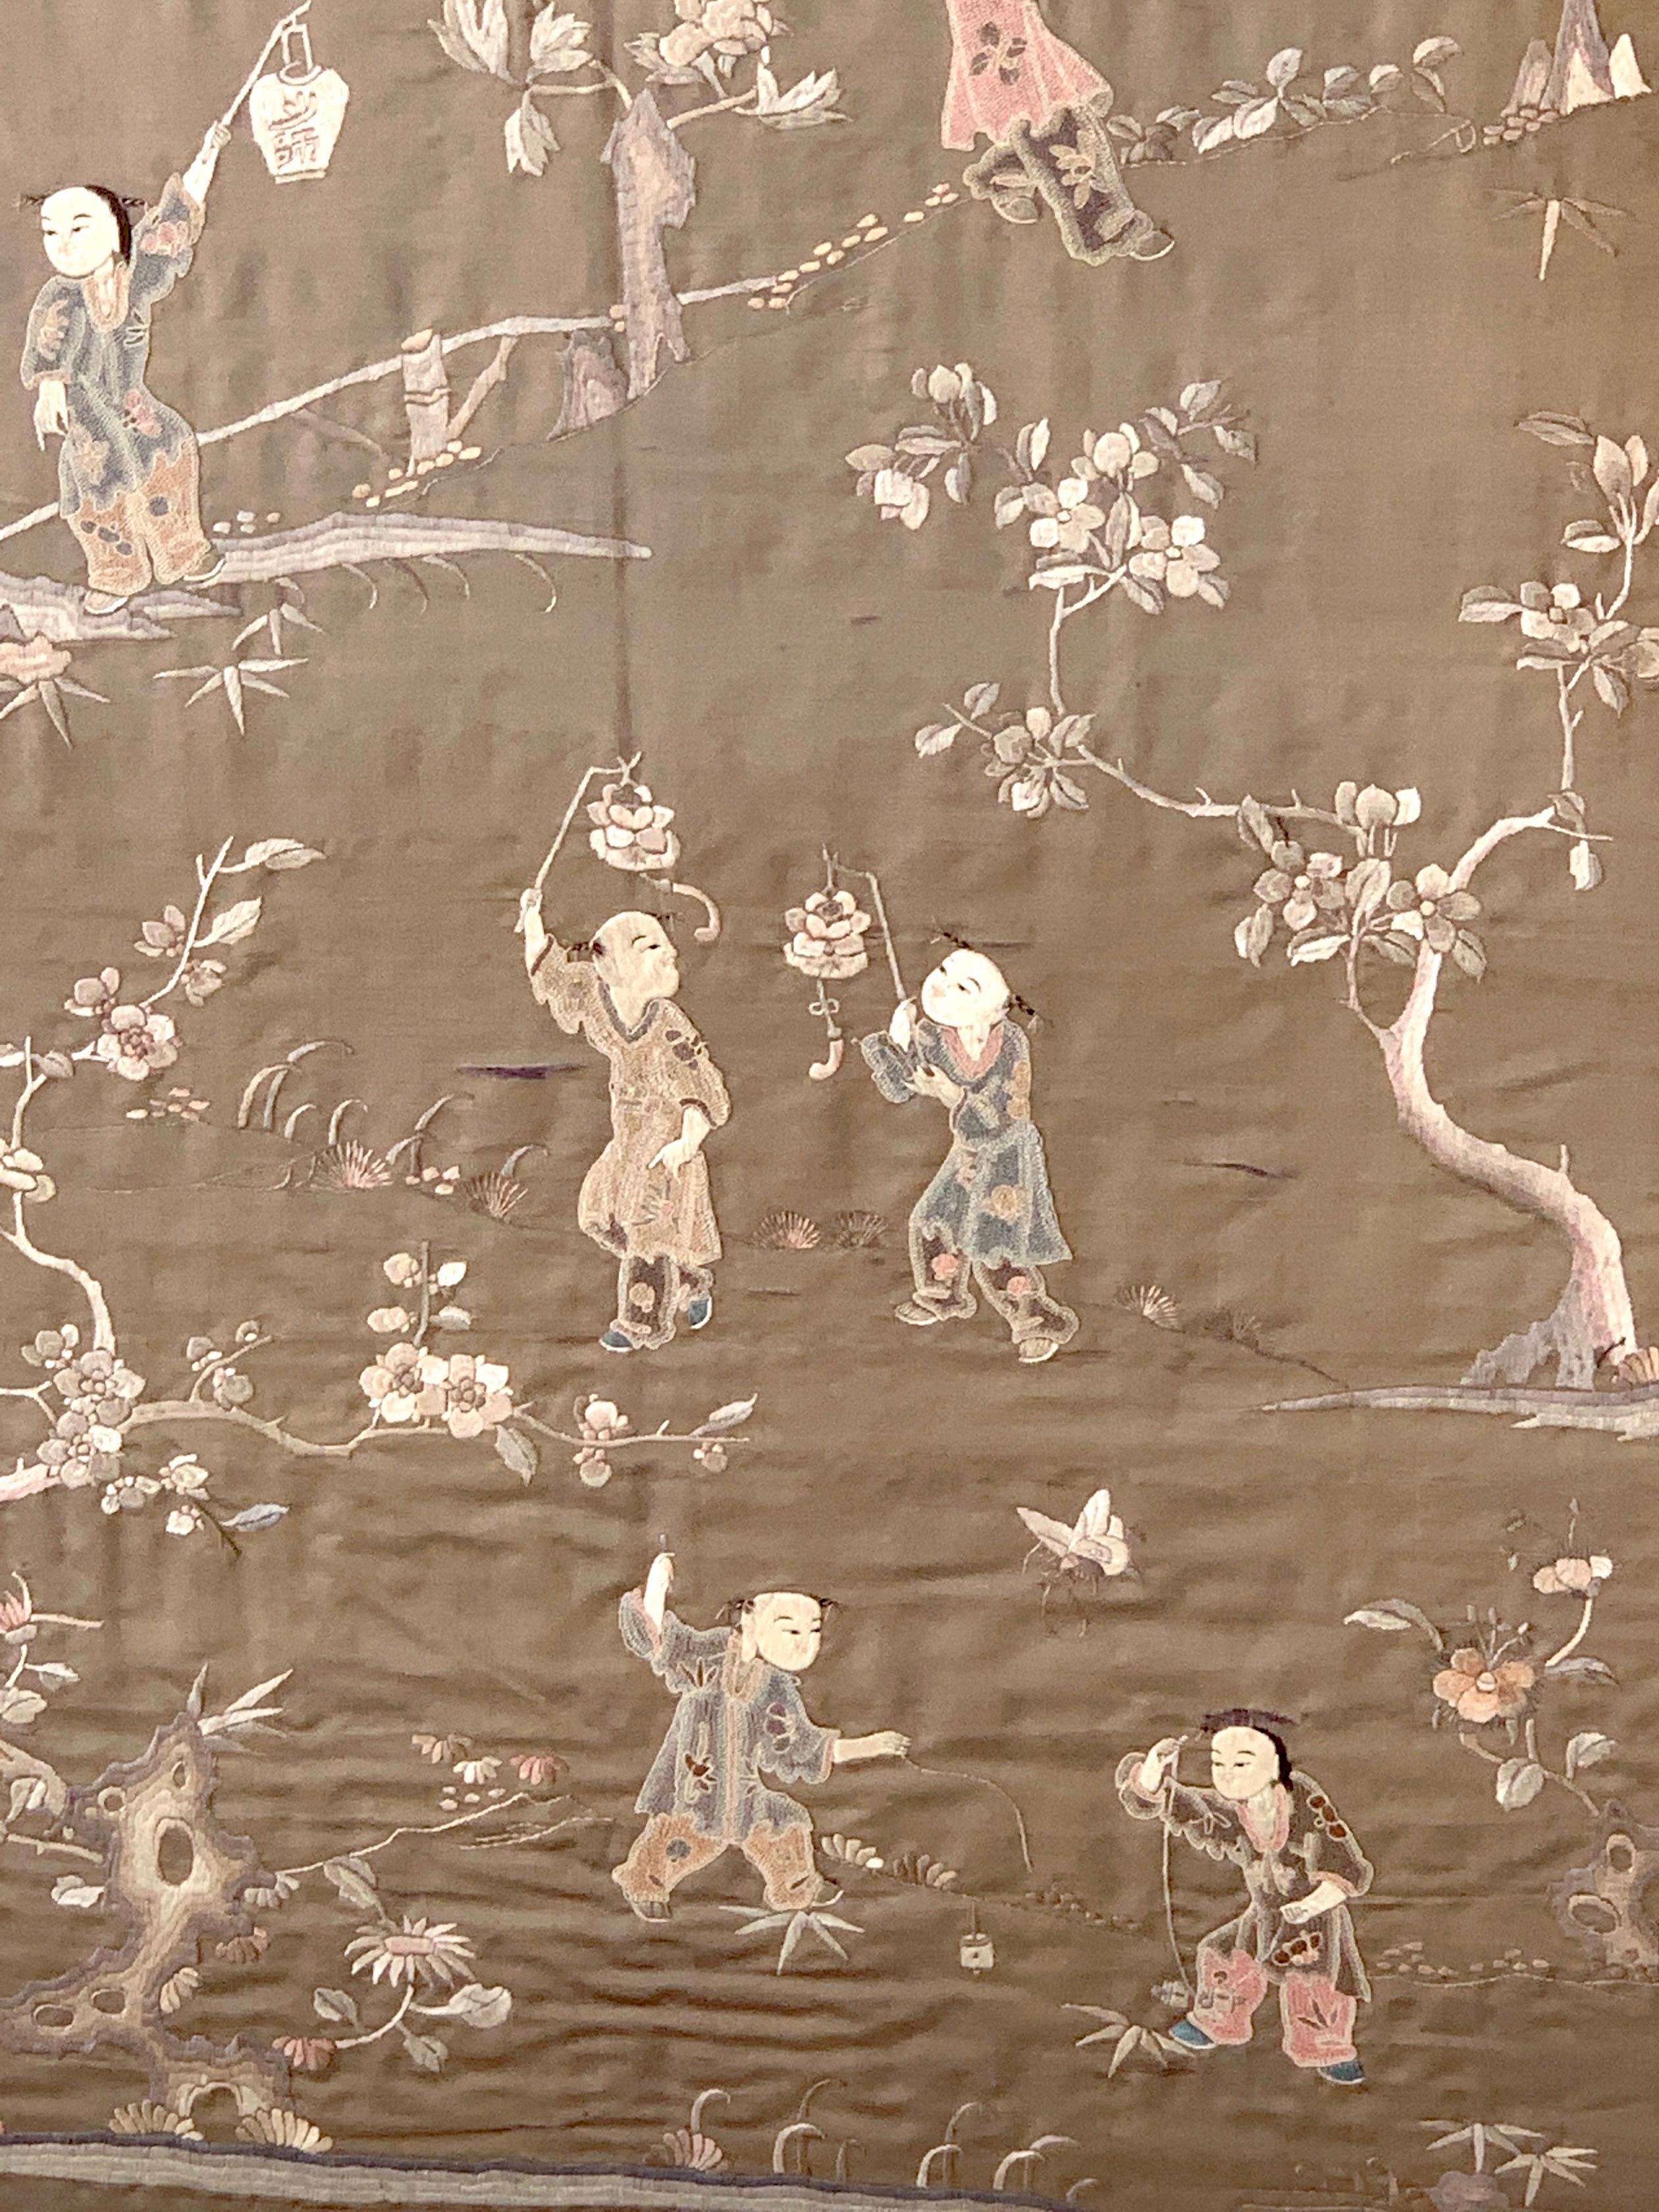 Exquisite Chinese Export Landscape Silk Embroidery 2